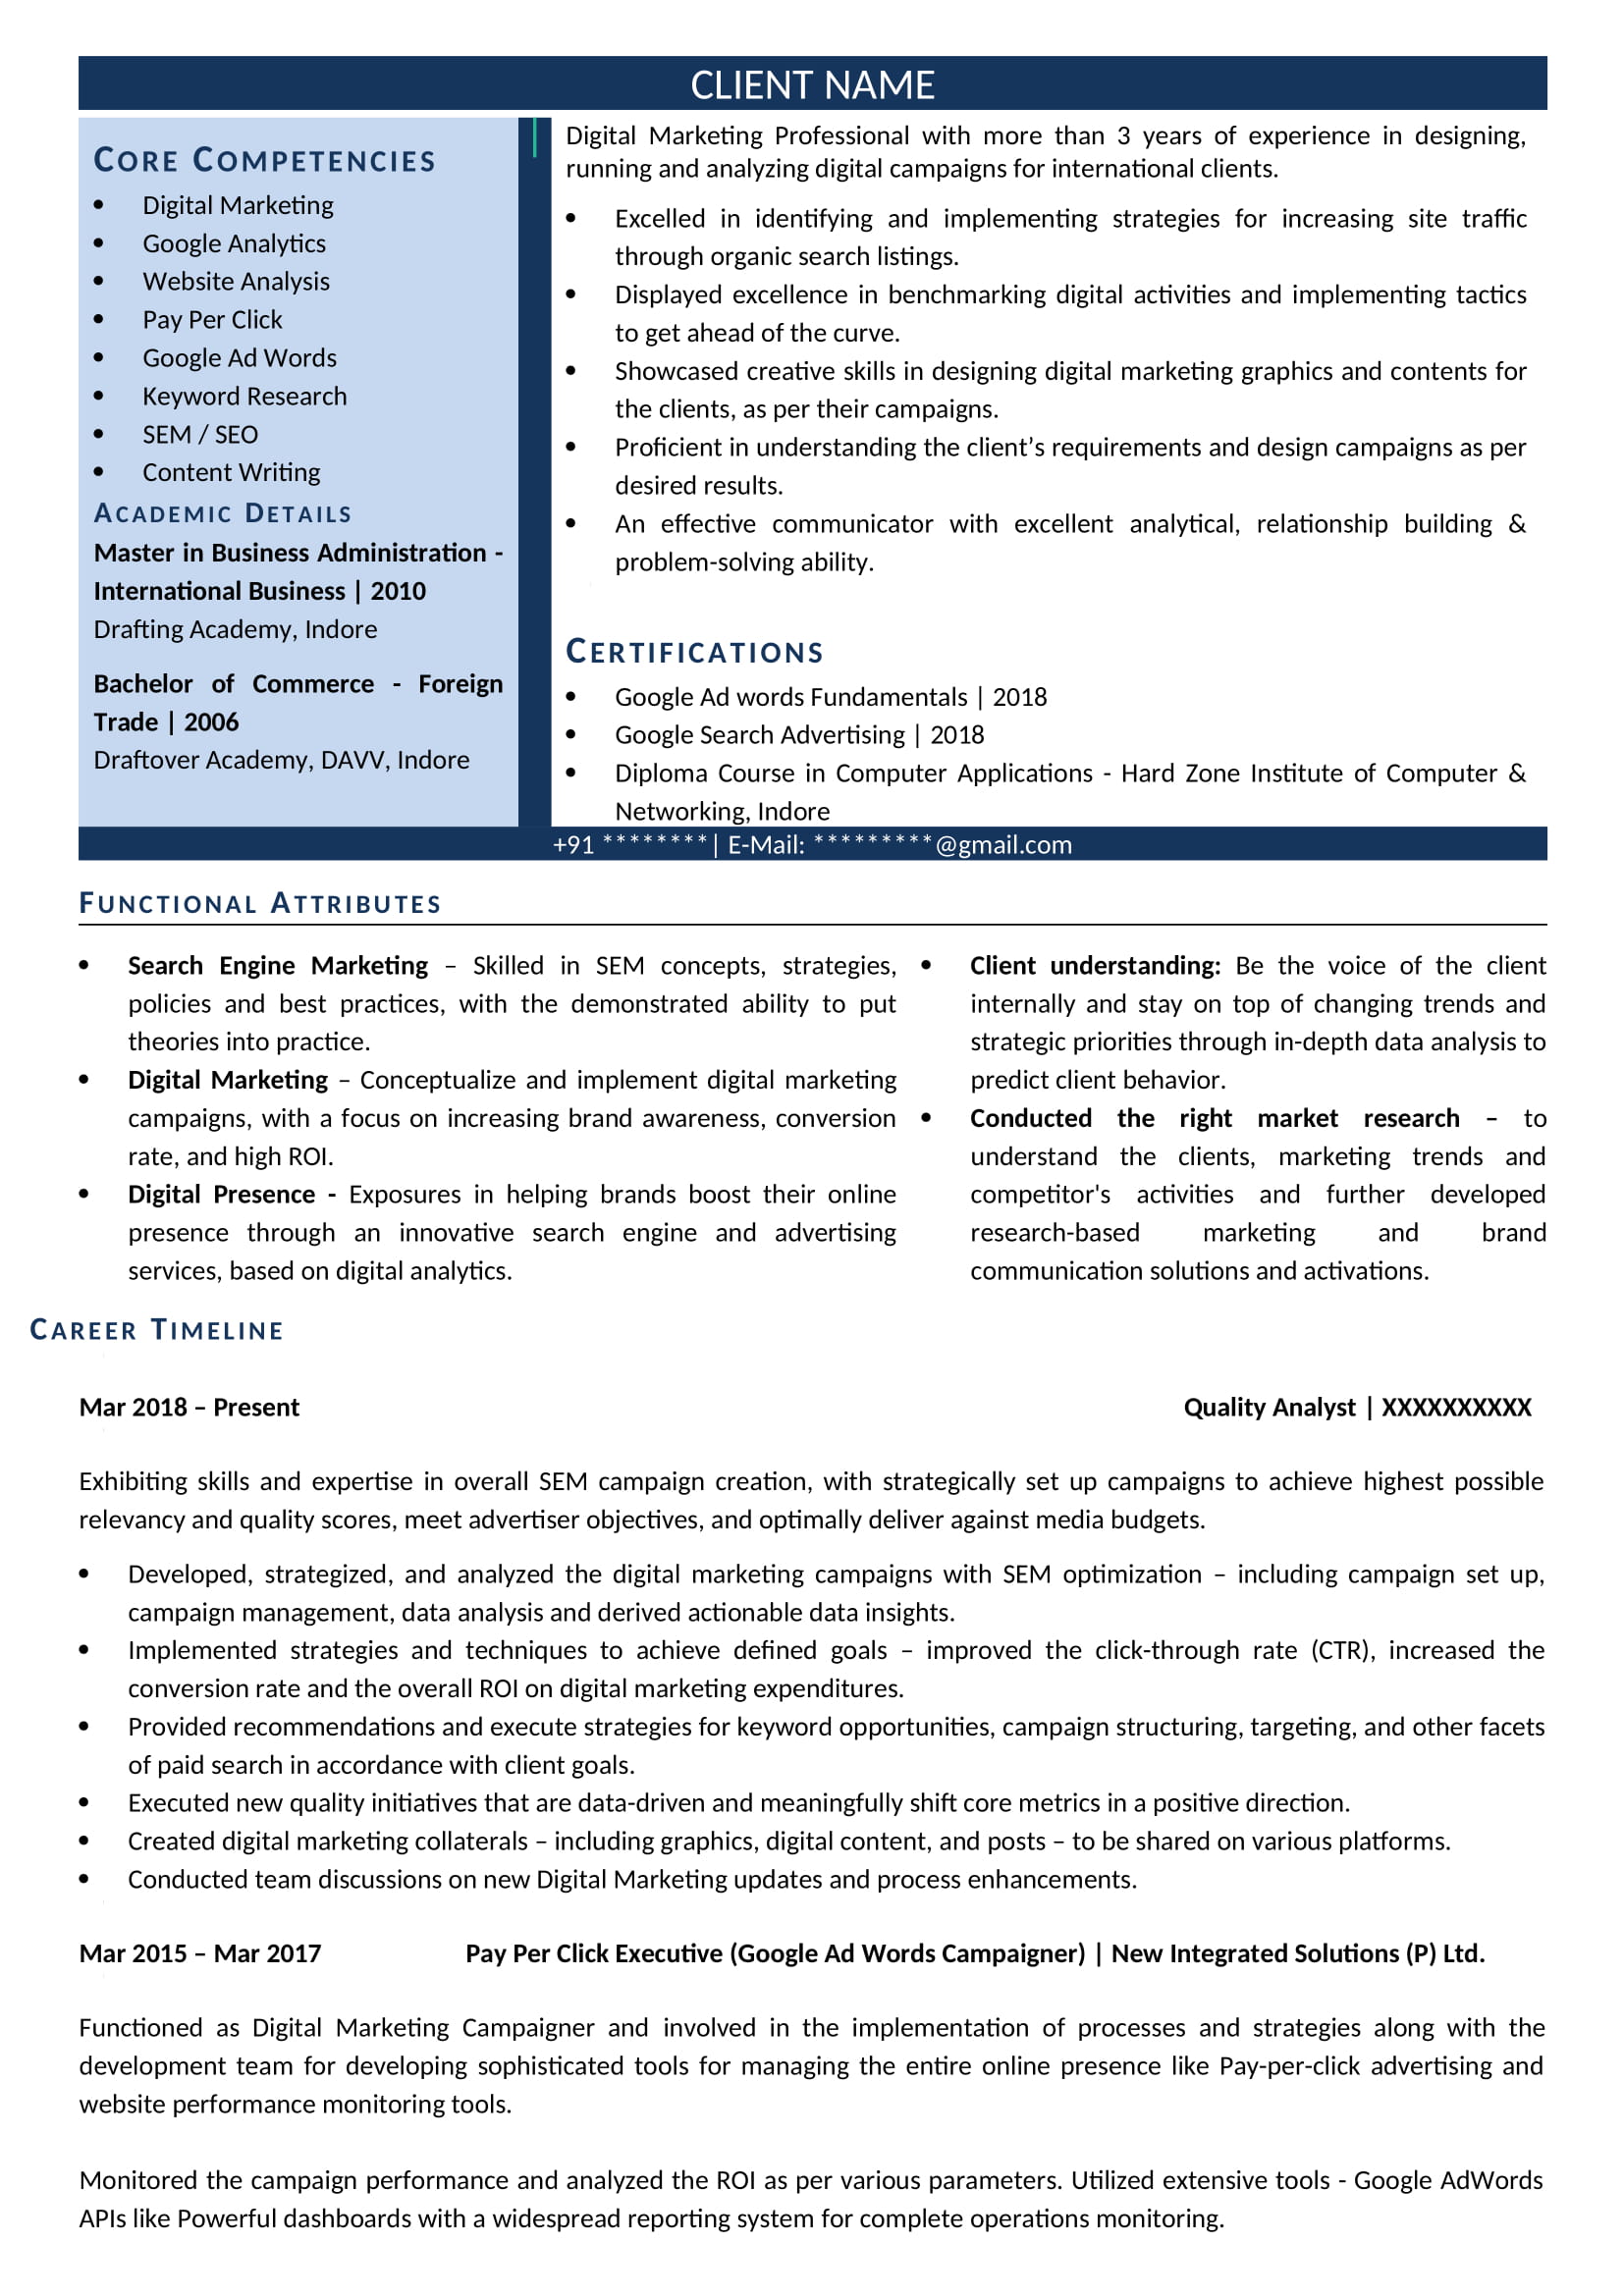 Text Resume format for Entry Level Digital Marketing Profile 